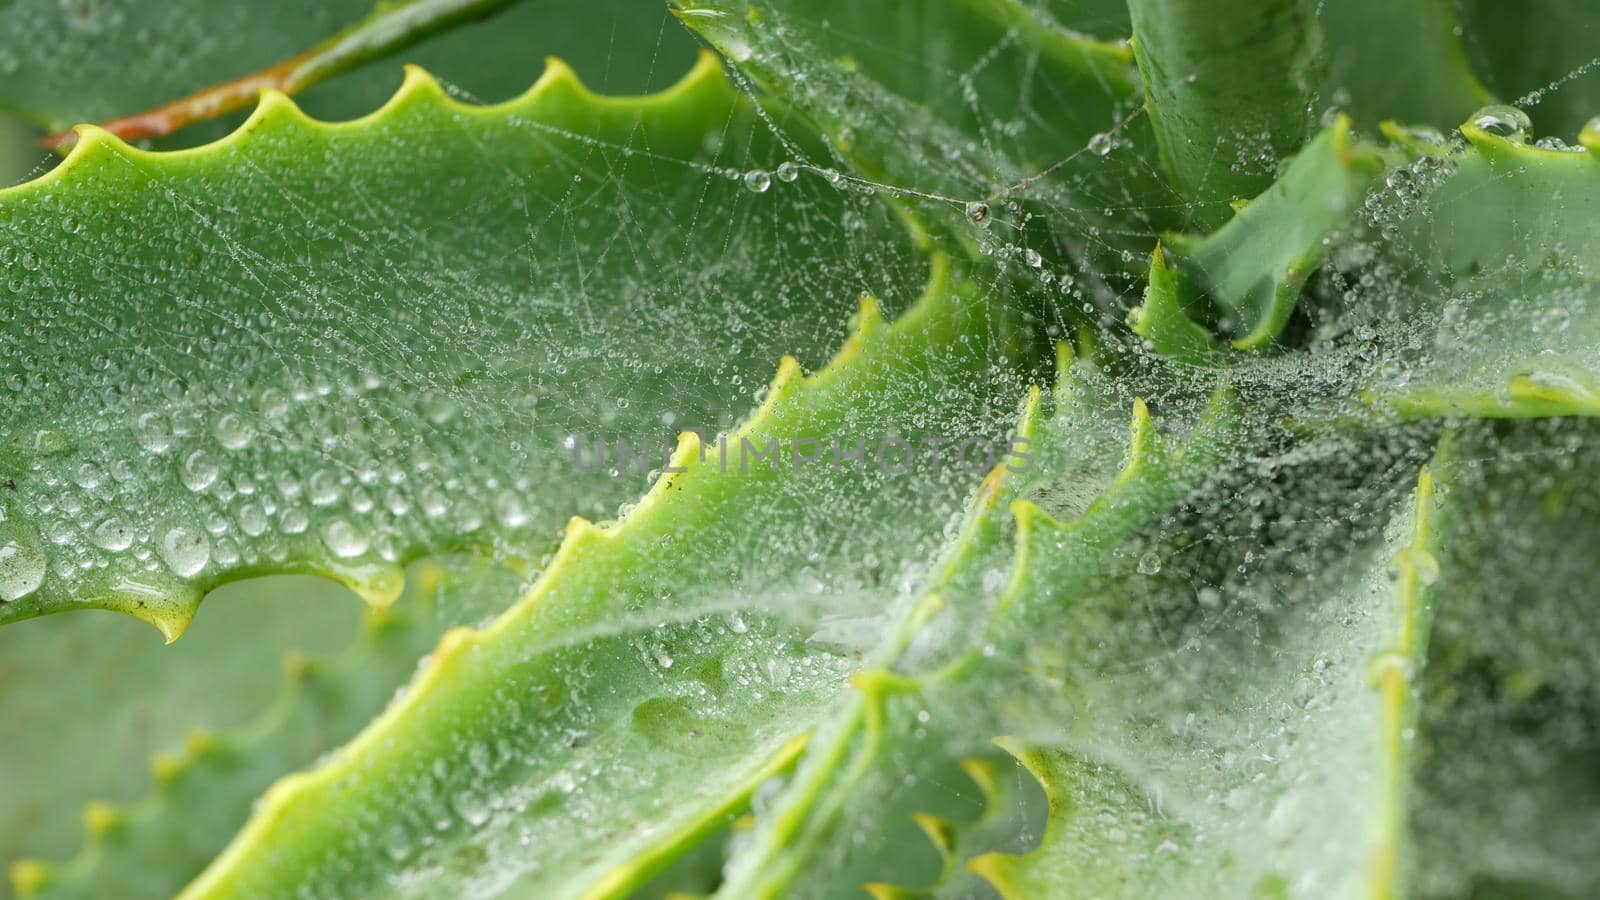 Aloe vera rosette, dew or rain water drops, fresh juicy green plant, moist leaves, raindrops or droplets. California succulent flora spring morning. Wet spider web or spiderweb. Moisturizing cosmetics